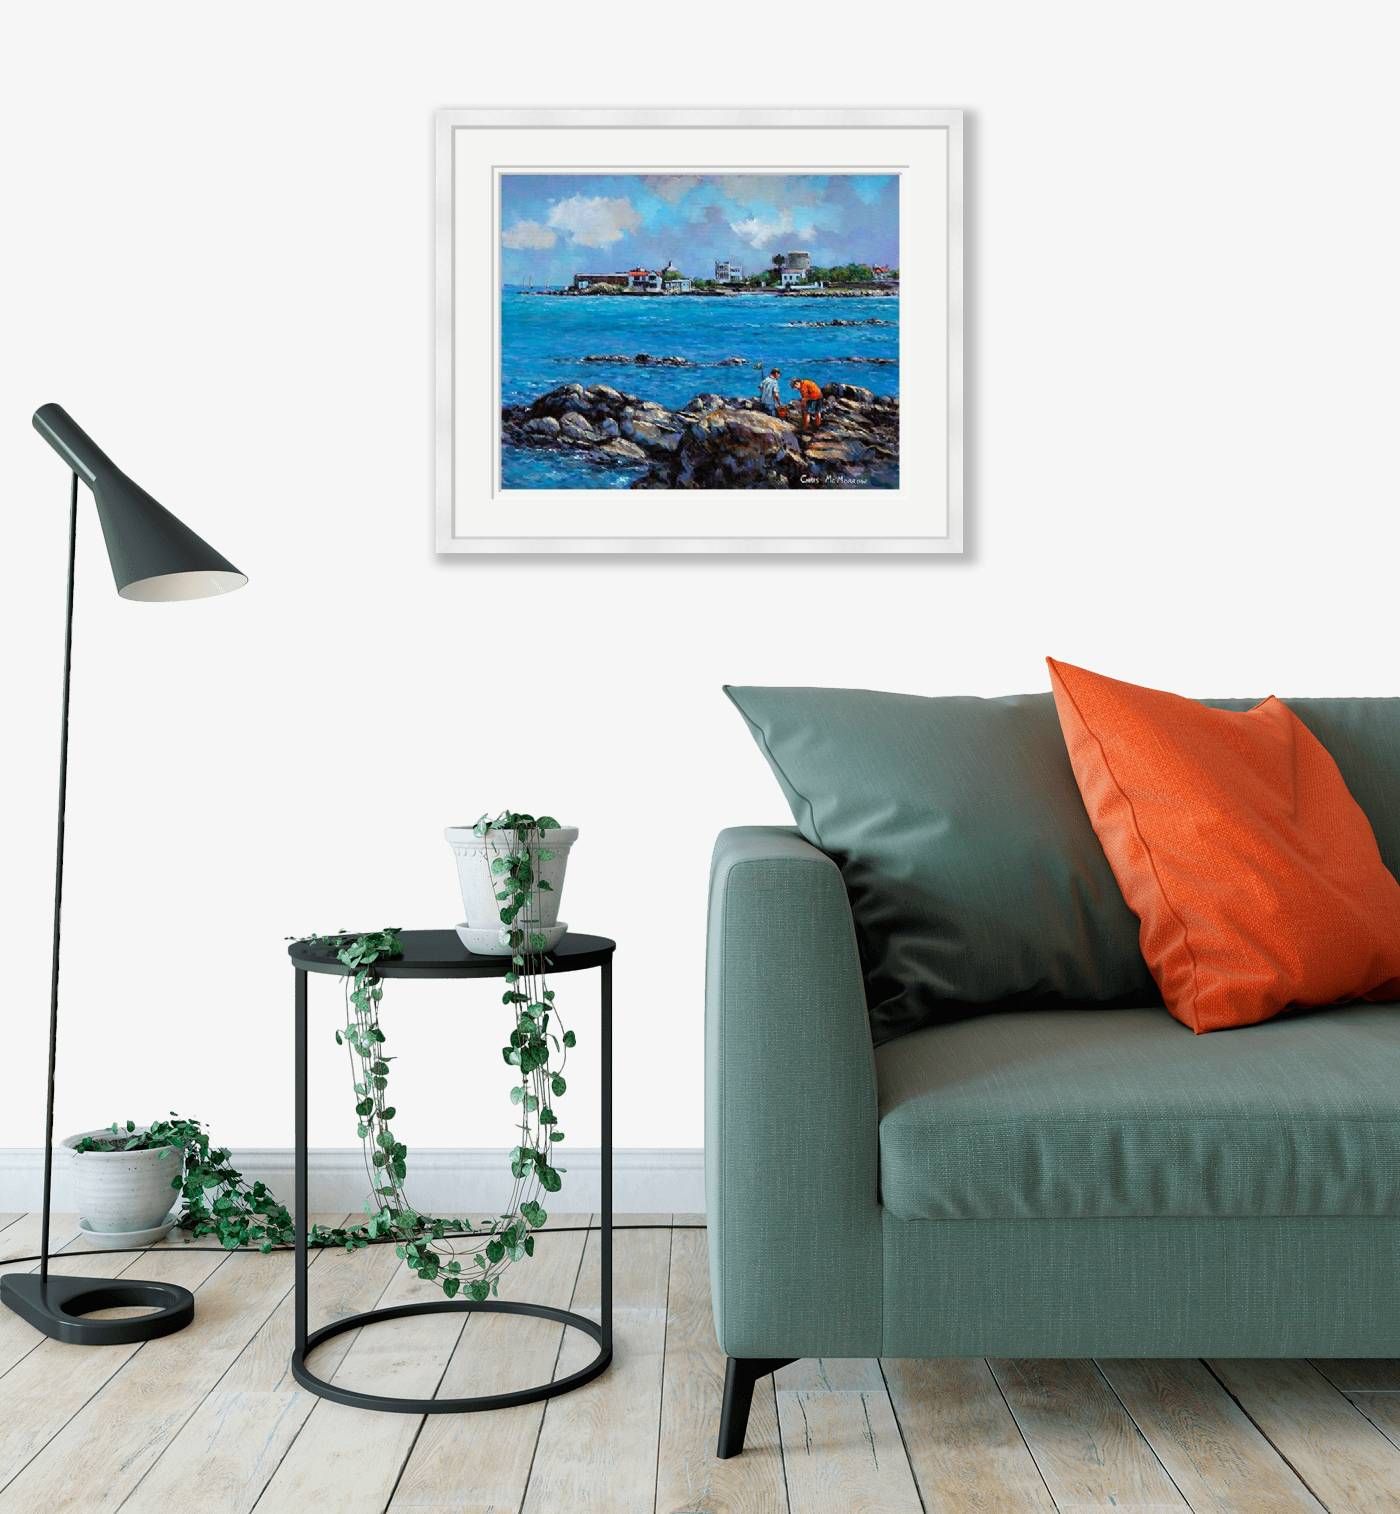 Large framed - Sandycove, Searches - 291 by Chris McMorrow